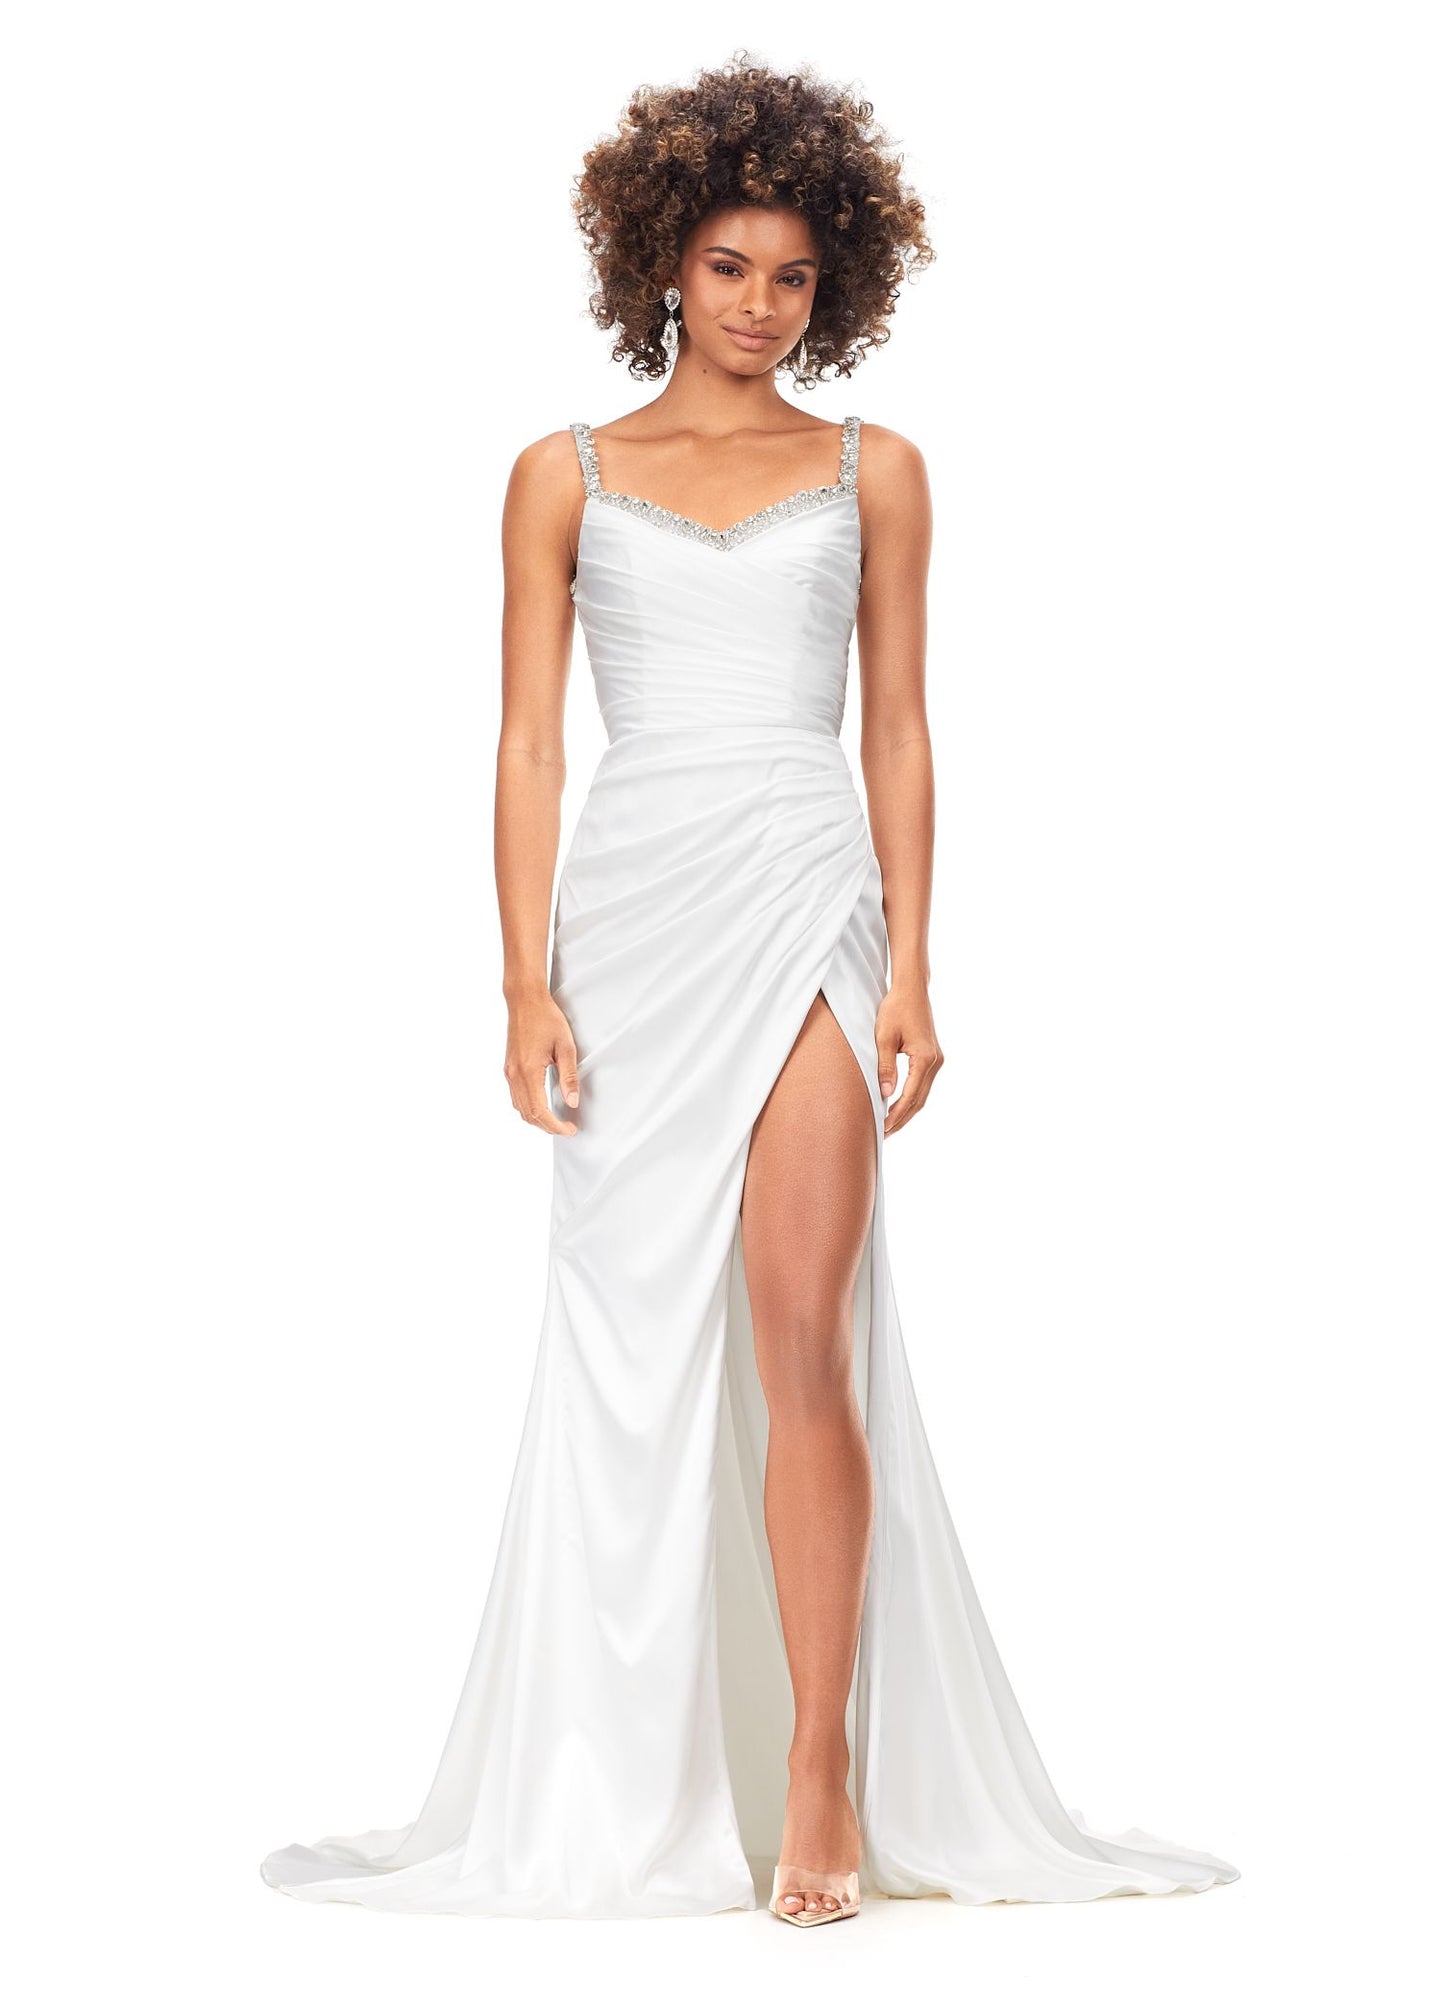 Ashley Lauren 11298 Ruched Satin Gown with Lace Up Back